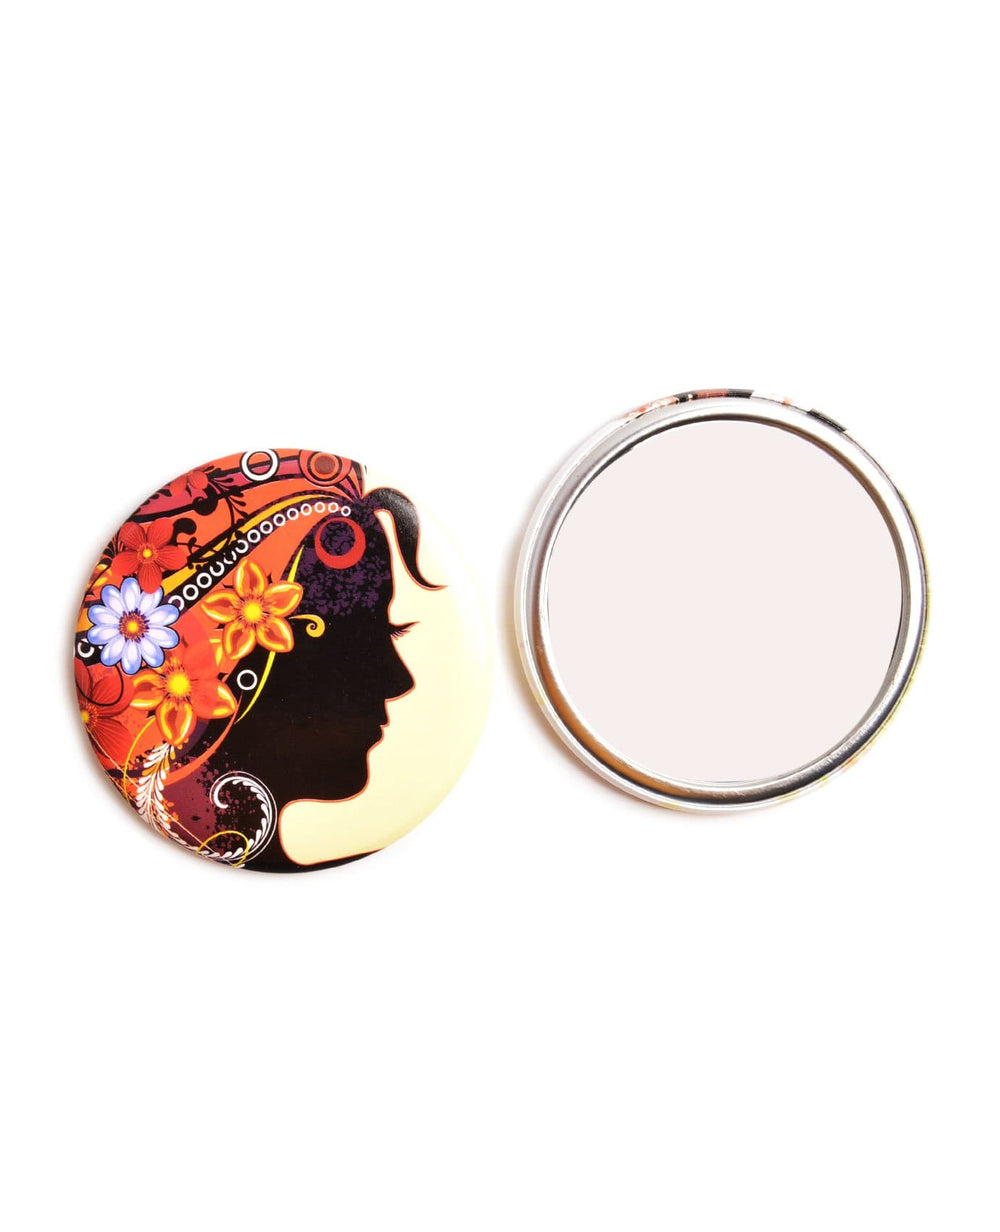 Floral Silhouette Tin Plate Pocket Mirror